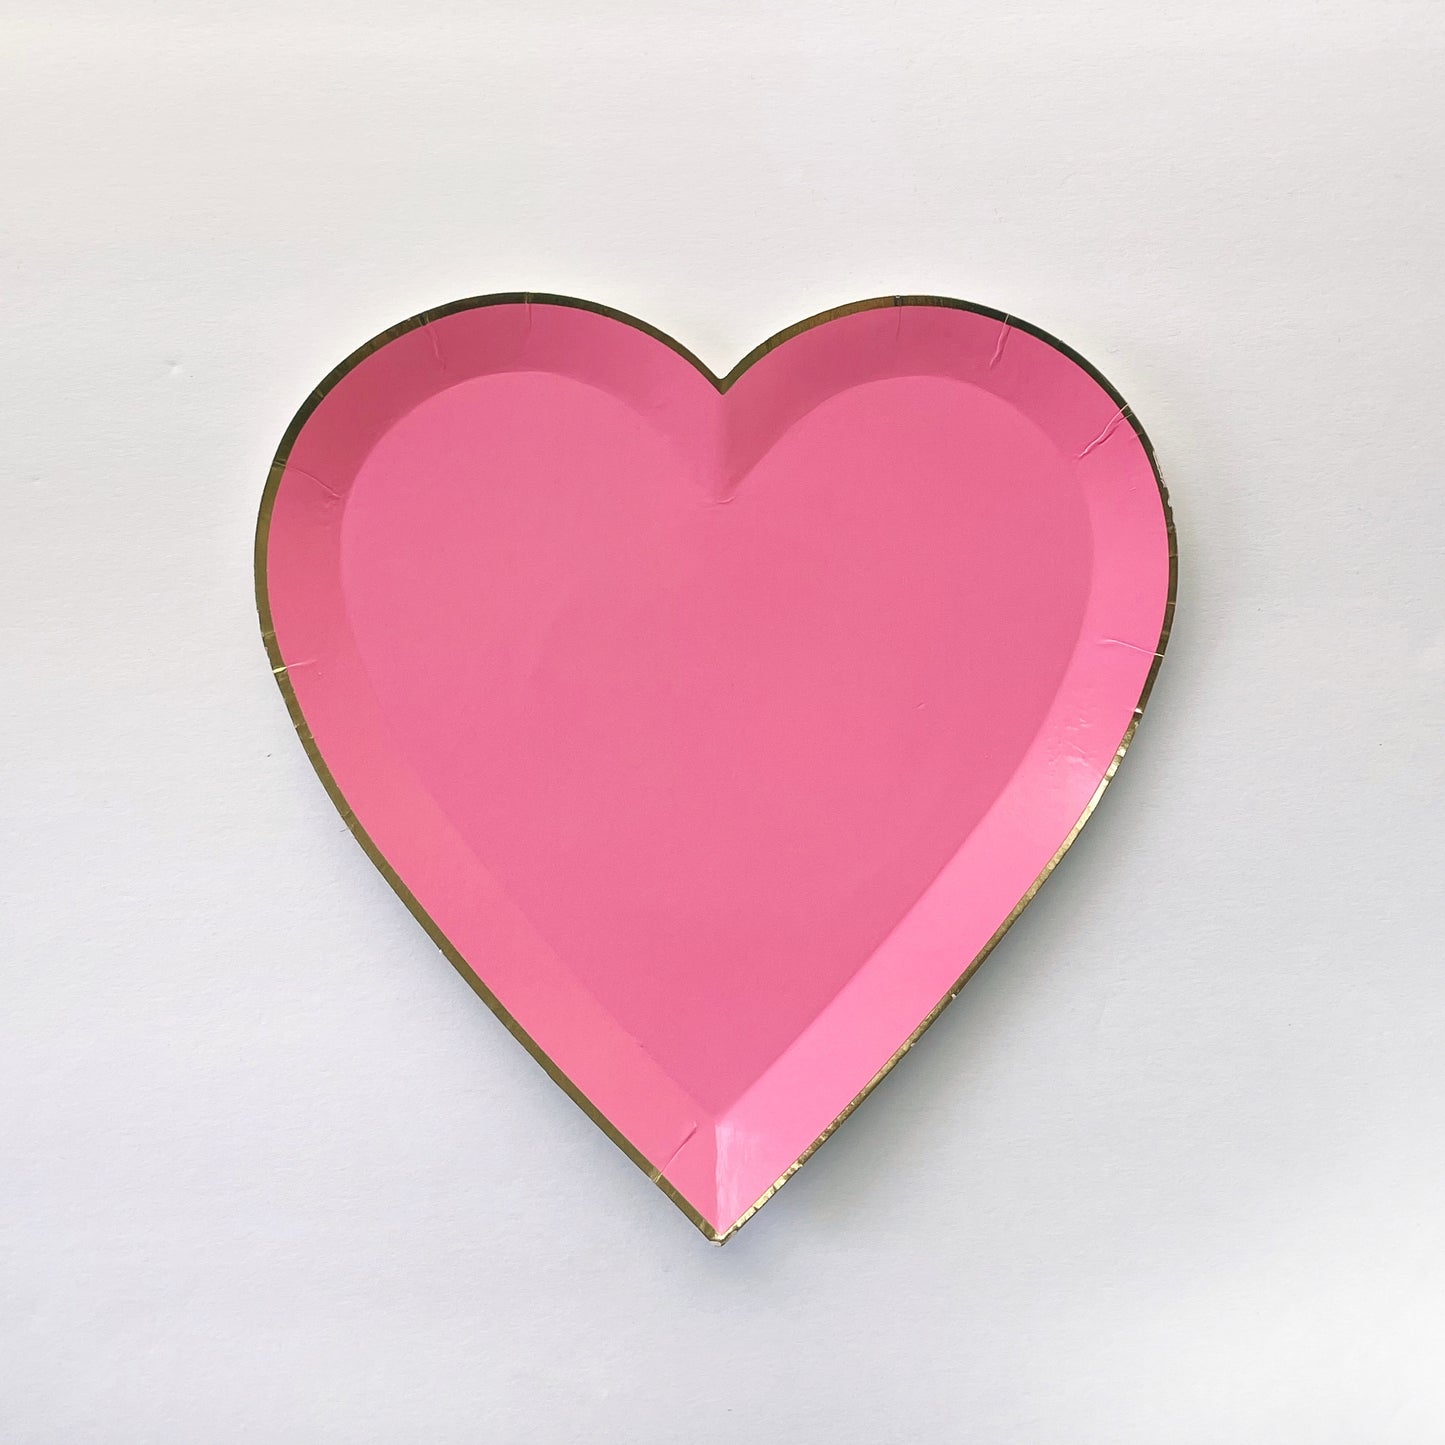 Bright pink heart shaped small party plate, with a gold foil edge.